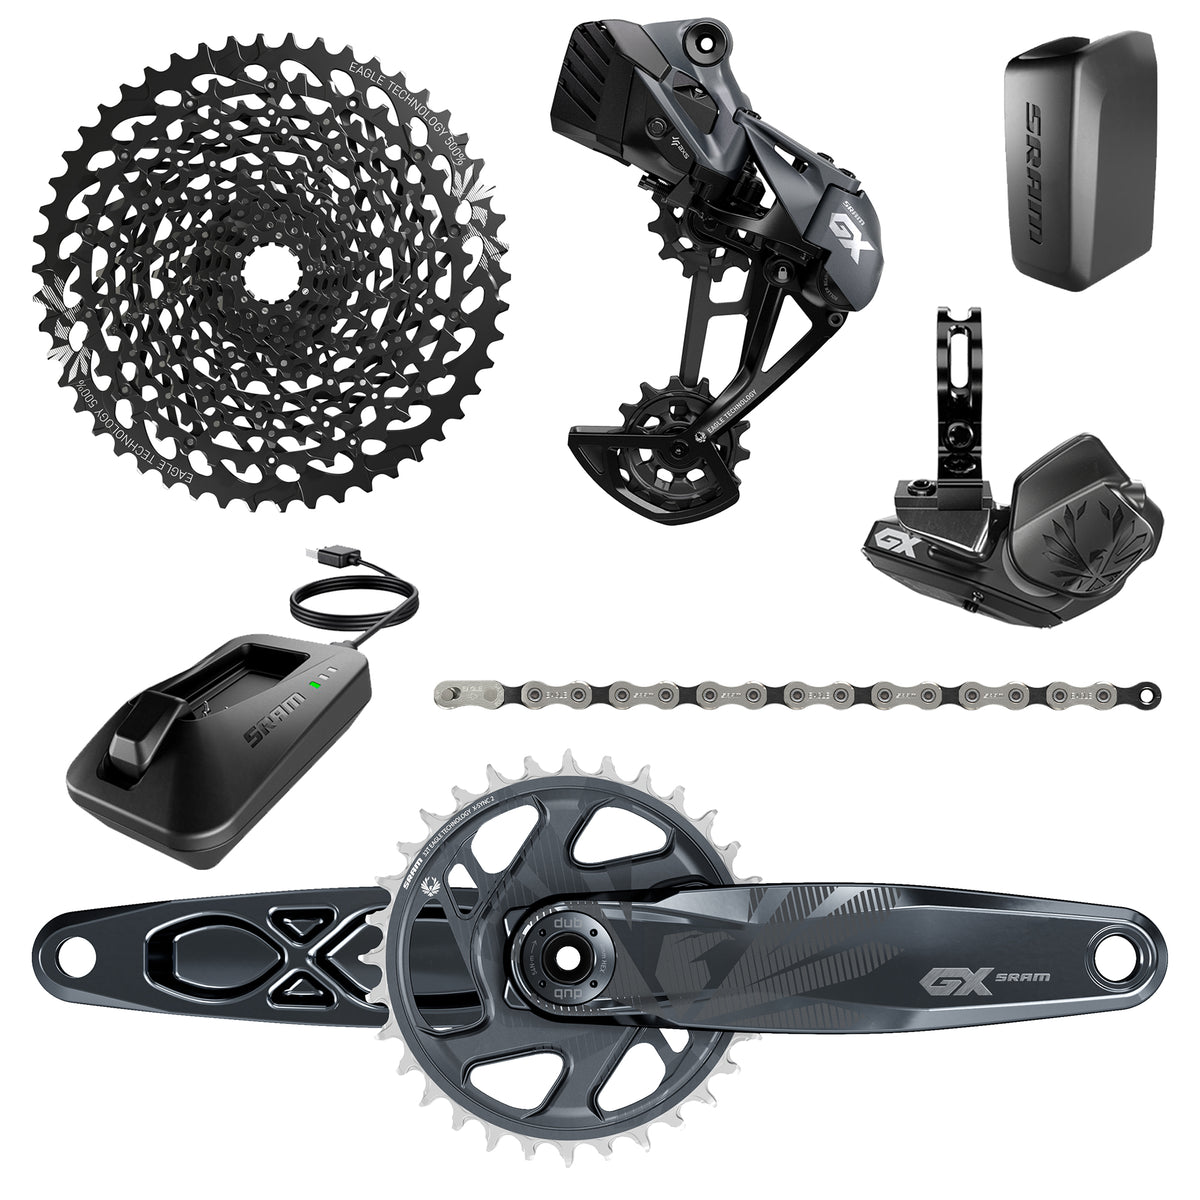 SRAM GX Eagle AXS DUB Groupset - 10-50T - Includes: Rear Der & Battery, Trigger Shifter Wclamp, Crankset DUB 12S 170/175 Boost Wdm 32T Xsync2 Chainring, GX Eagle Chain, Cassette Xg-1275 10-50T, Charger/Cord, Chaingap Gauge 170MM 